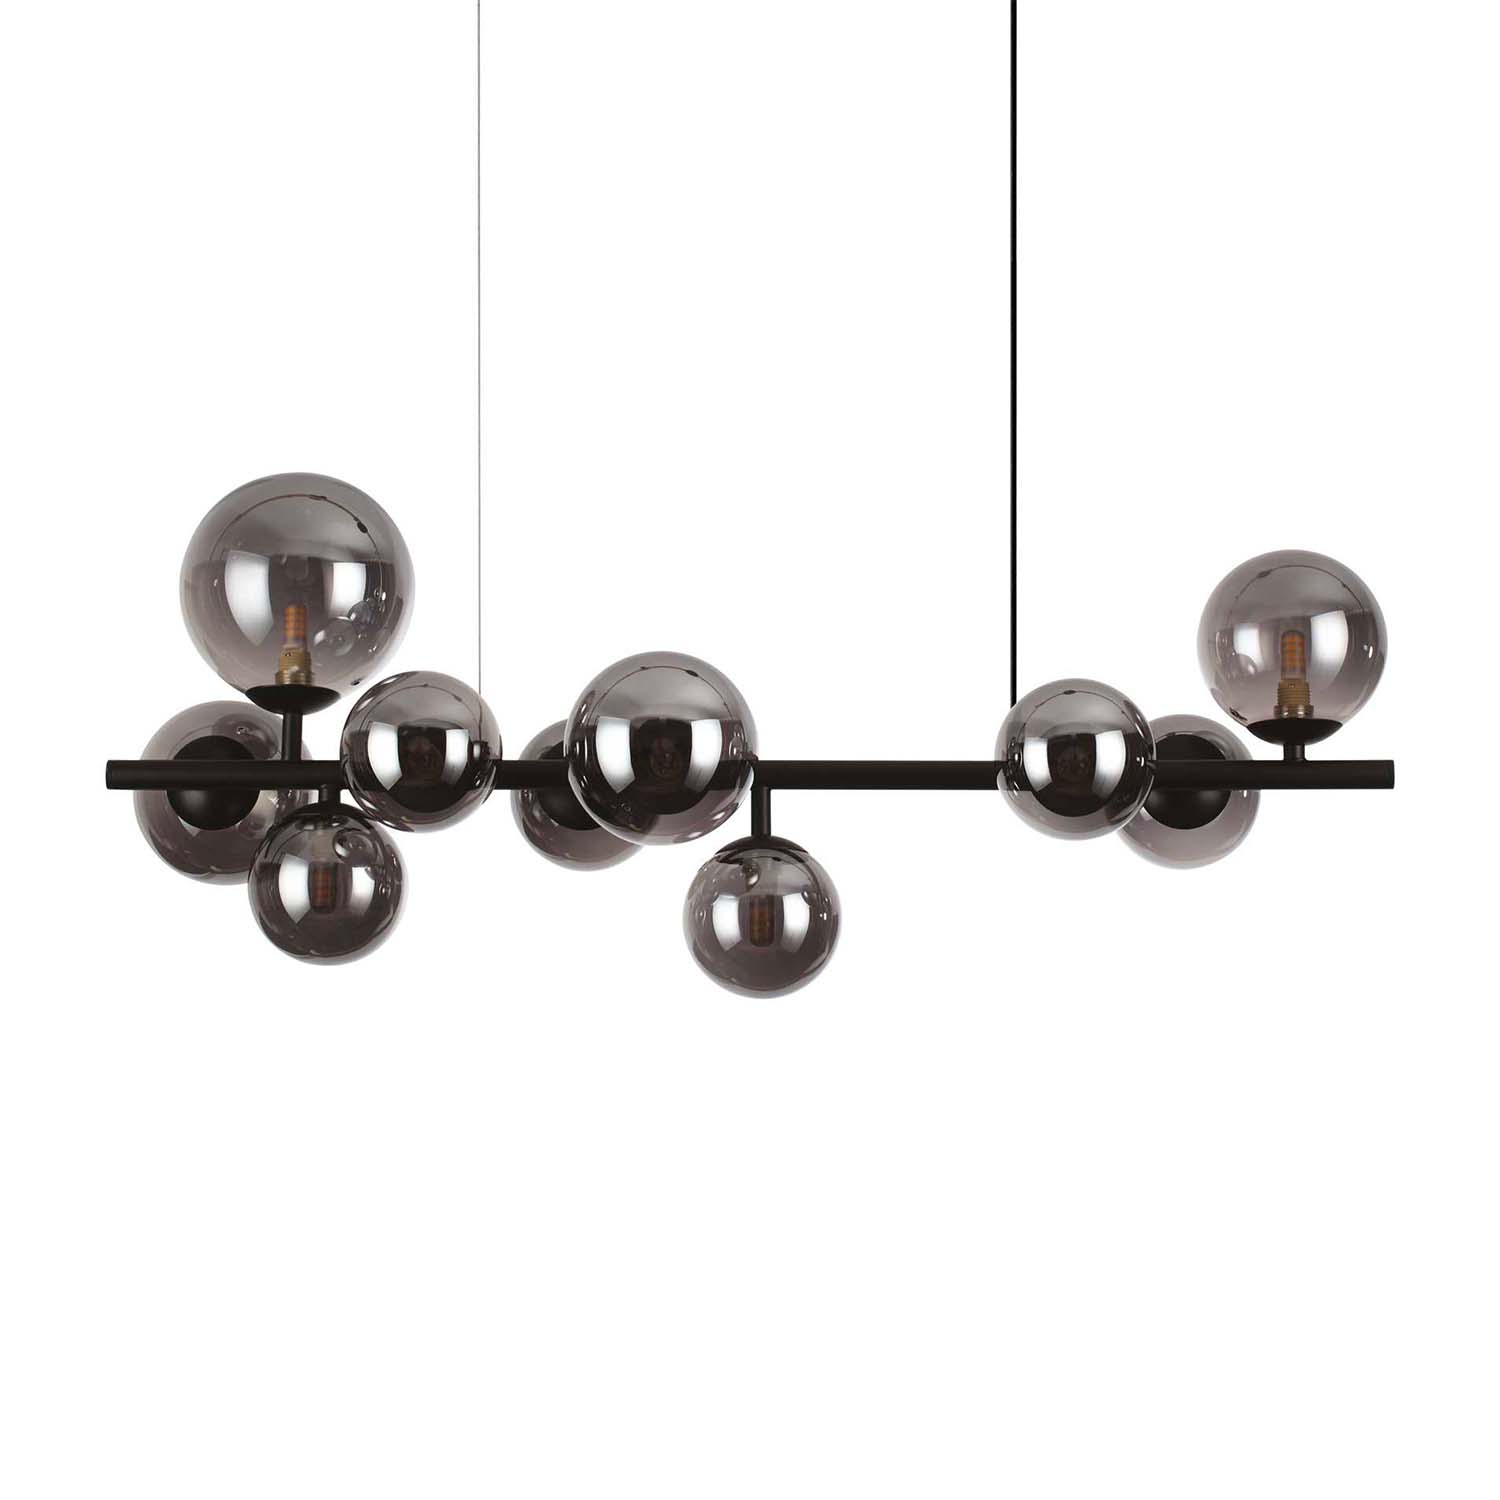 PERLAGE - Chic and elegant gold or black chandelier with glass globes